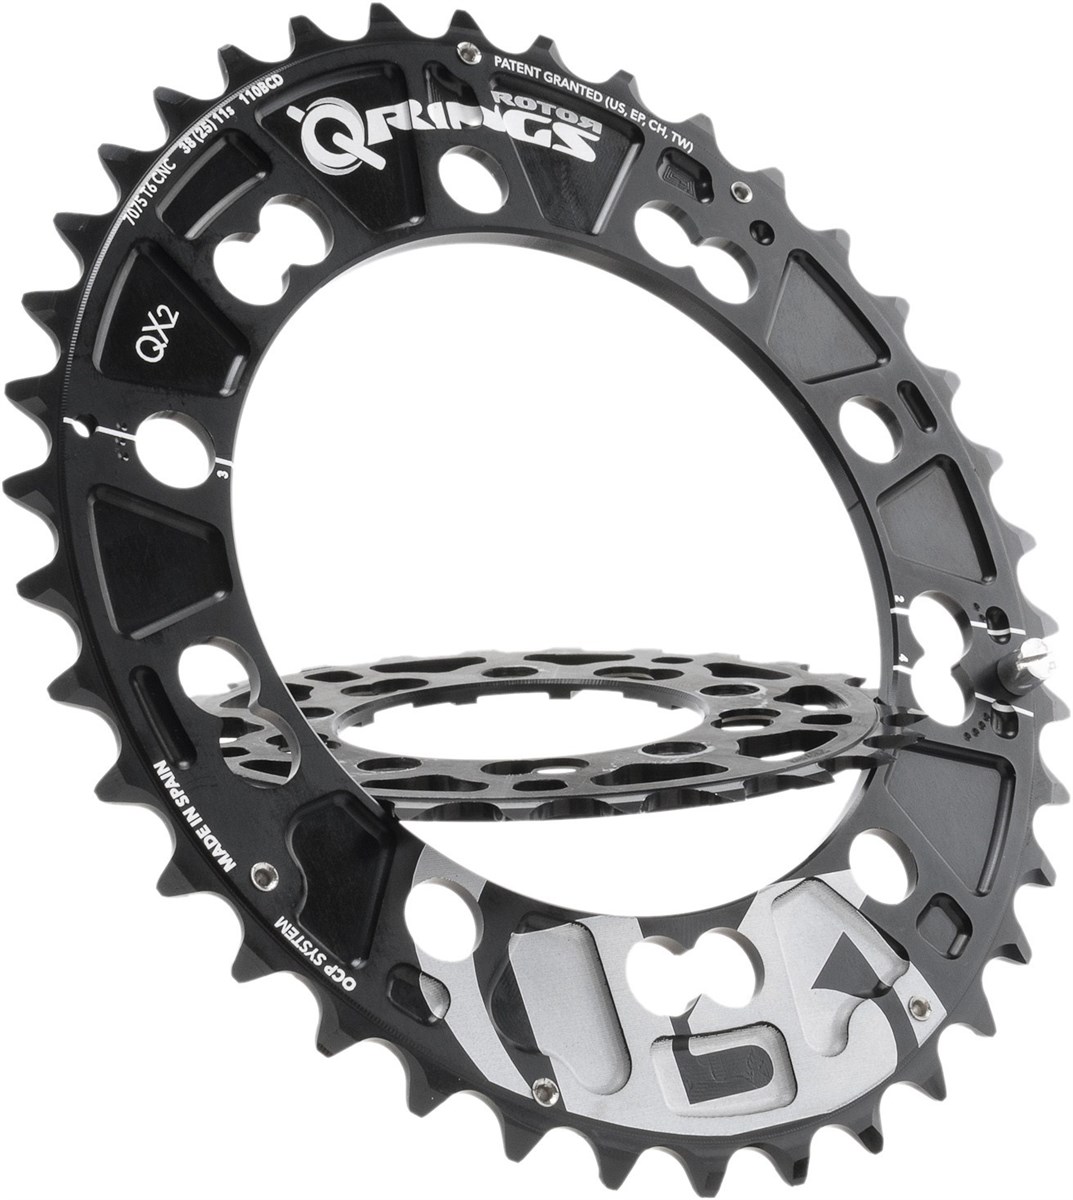 Rotor QX2 BCD 74 Inner Chainring product image